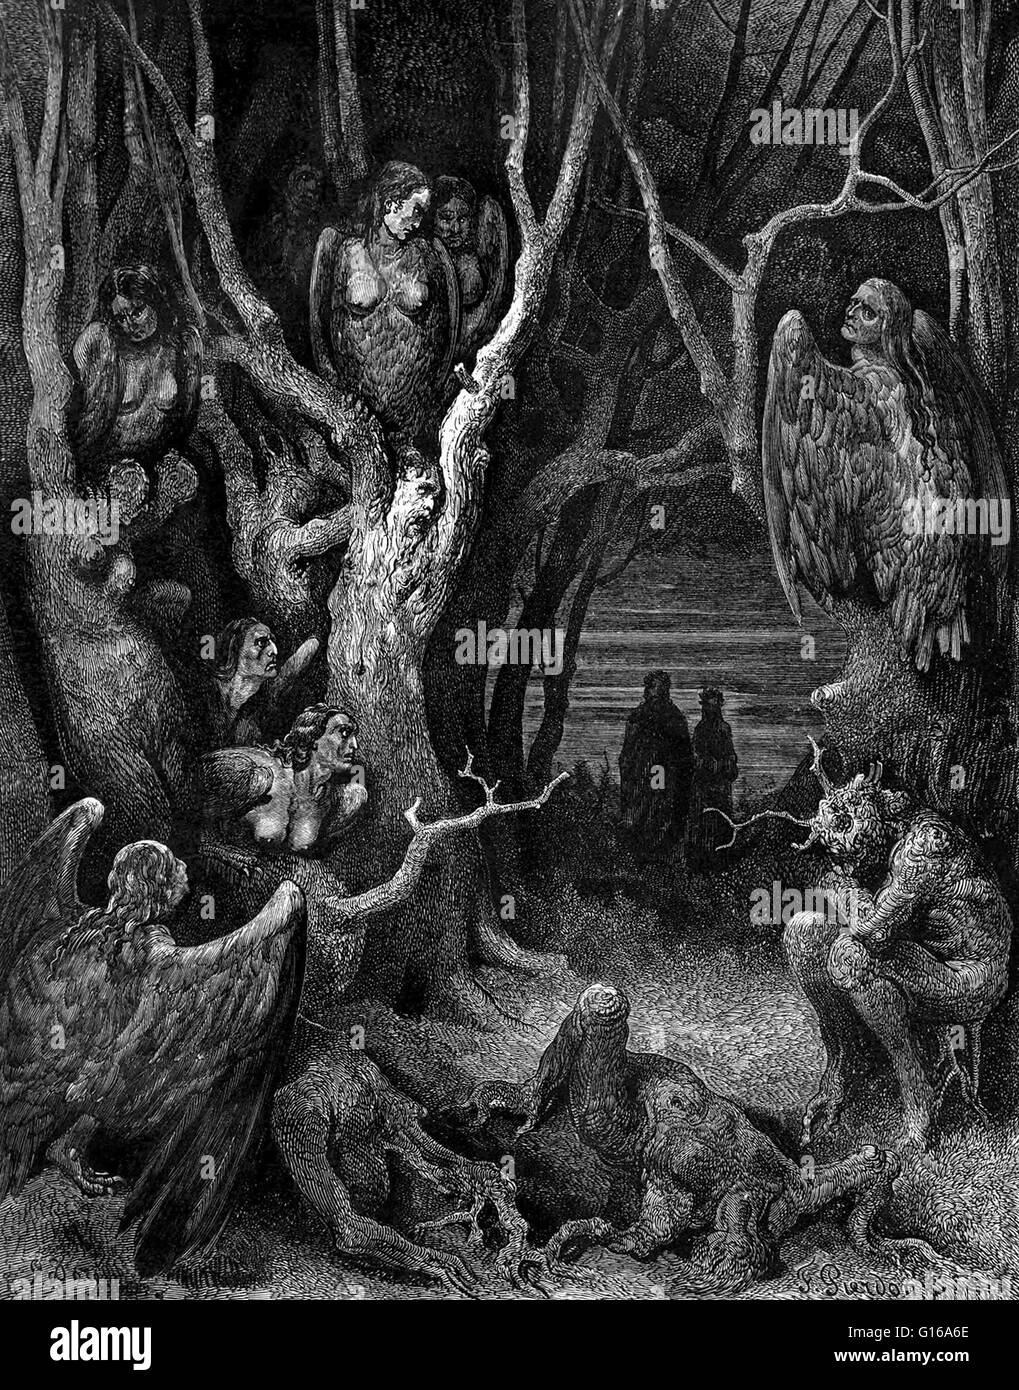 Harpies in the infernal wood, from Inferno XIII, by Gustave Doré, 1861. Harpies remained vivid in the Middle Ages. In his Inferno, XIII, Dante envisages the tortured wood infested with harpies, where the suicides have their punishment in the second ring. Stock Photo